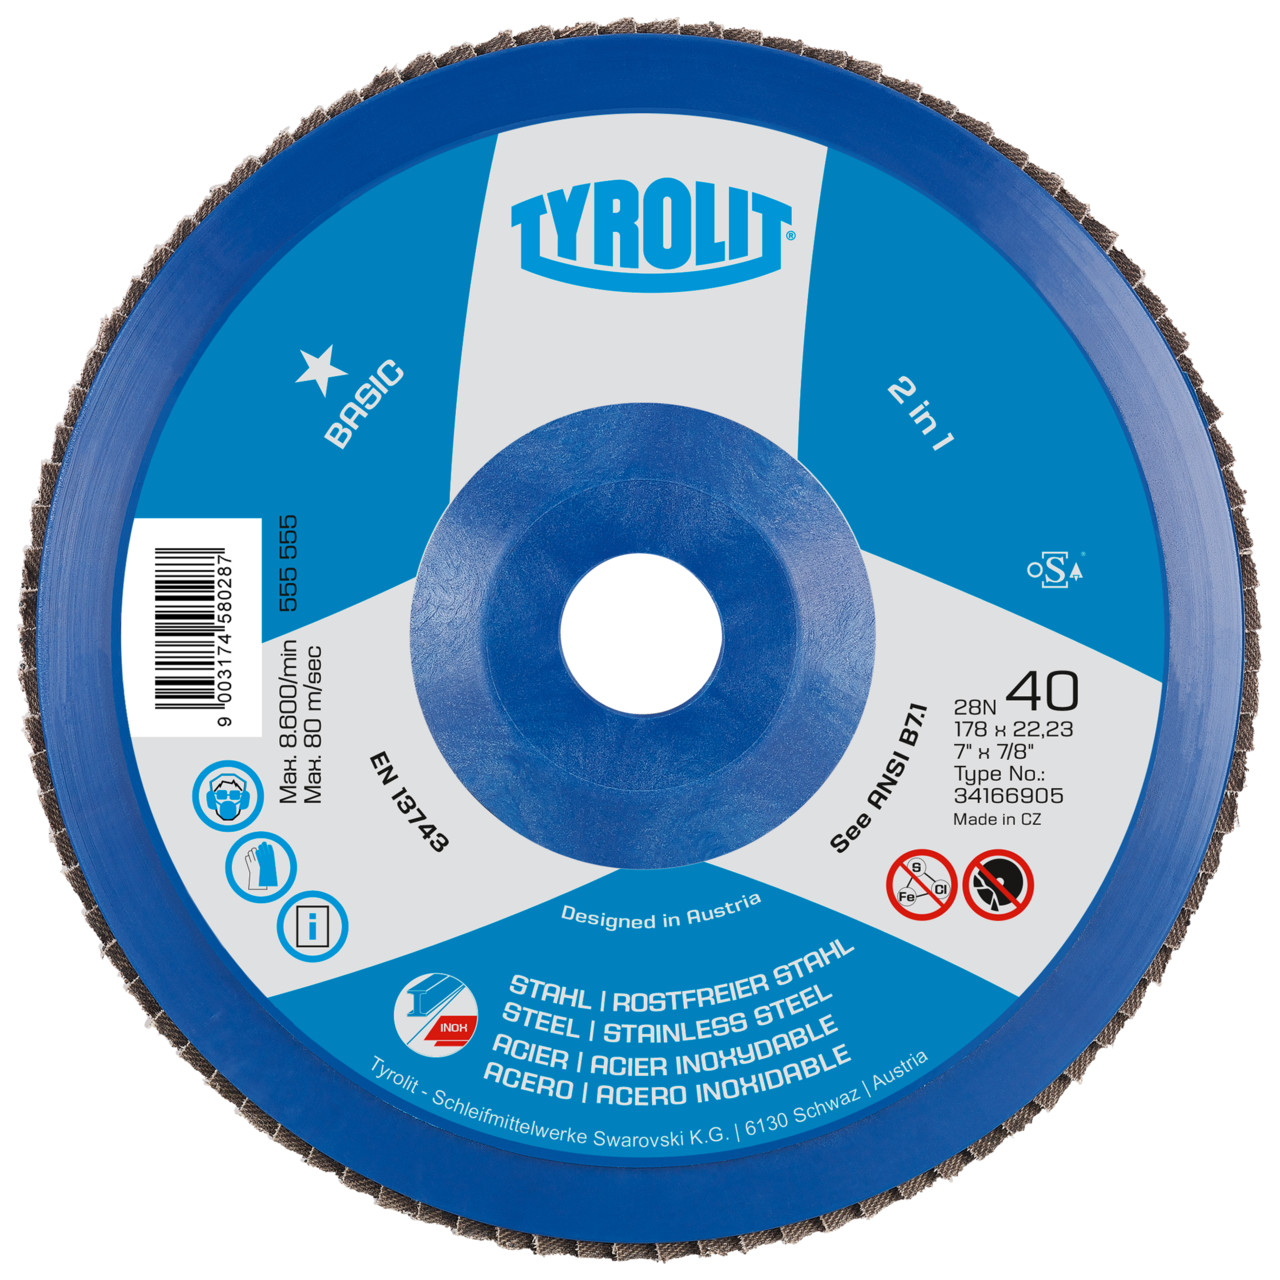 Tyrolit Serrated lock washer DxH 115x22.23 2in1 for steel &amp; stainless steel, P60, shape: 28N - straight version (plastic carrier body), Art. 34318569